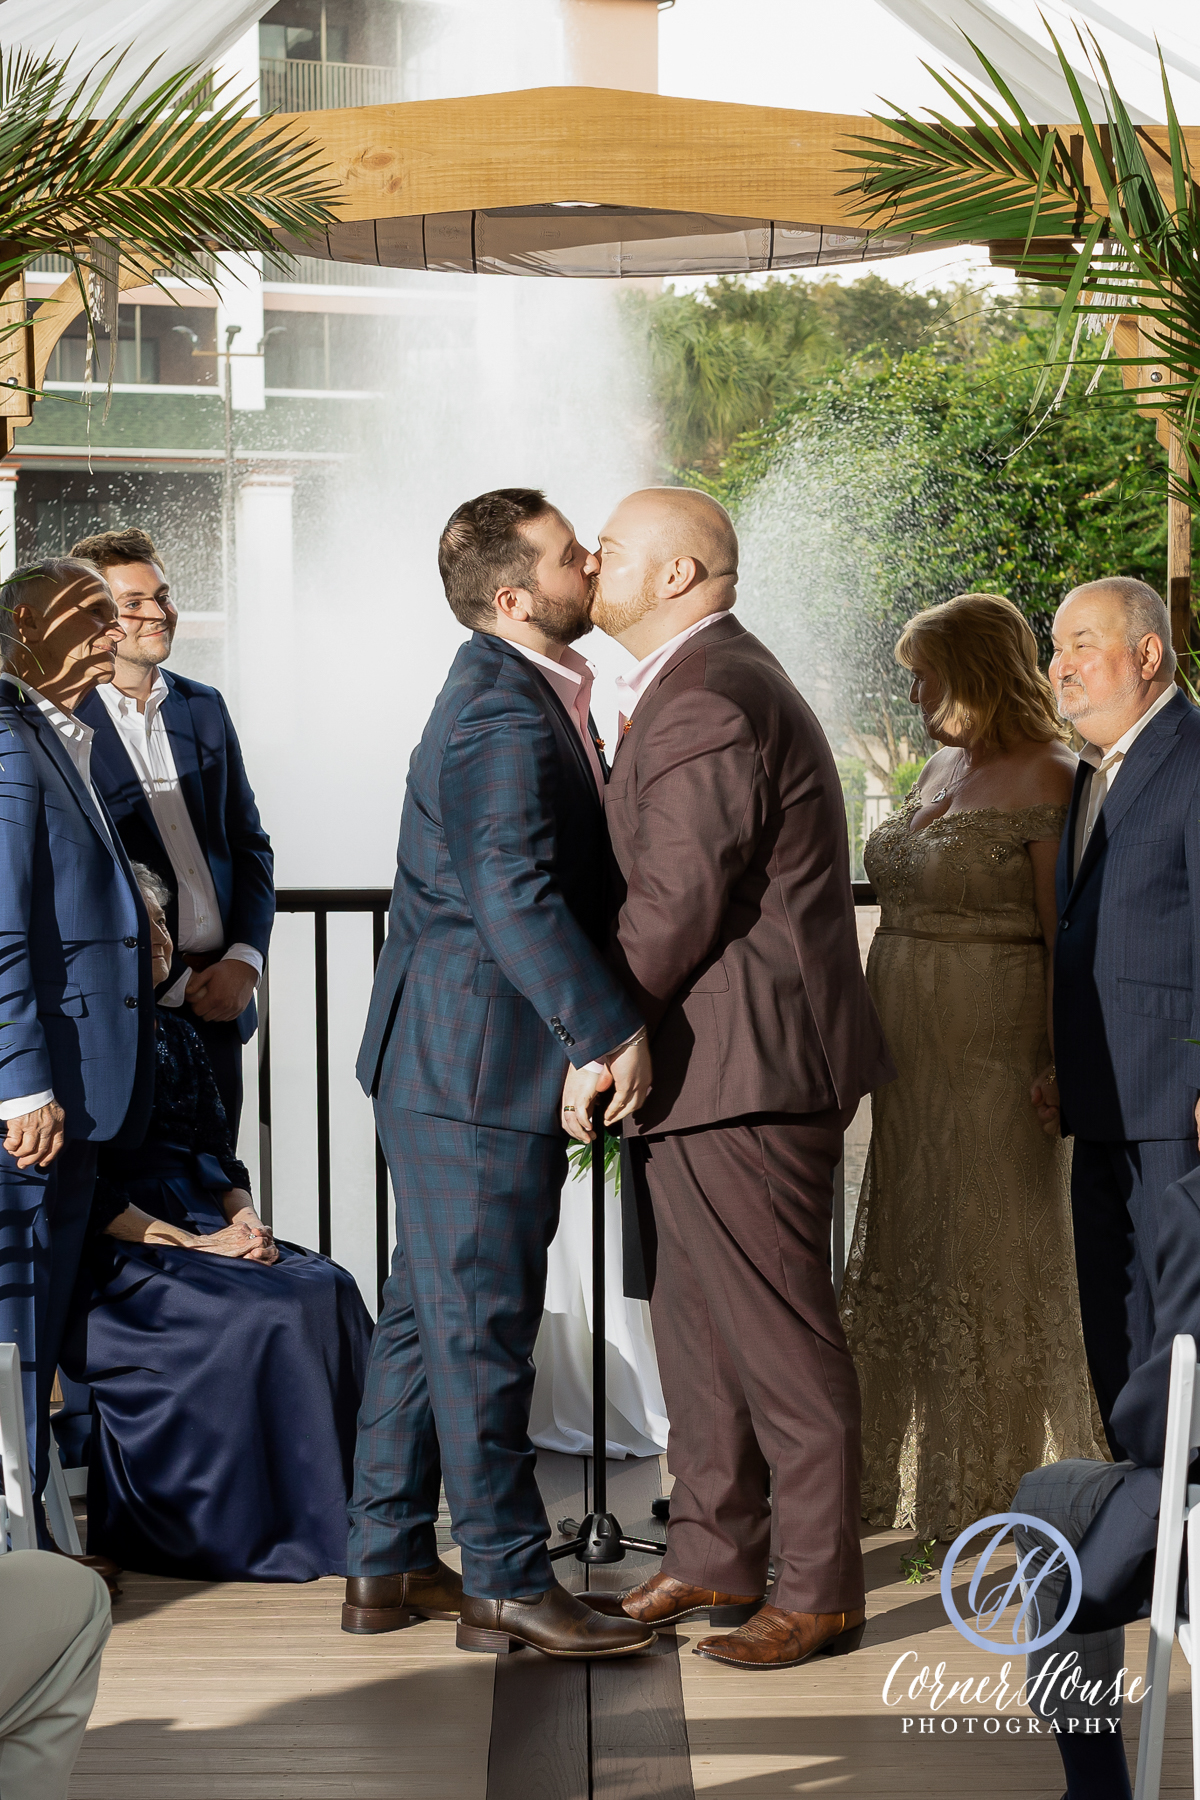 Matt and Chance's kiss at their wedding ceremony